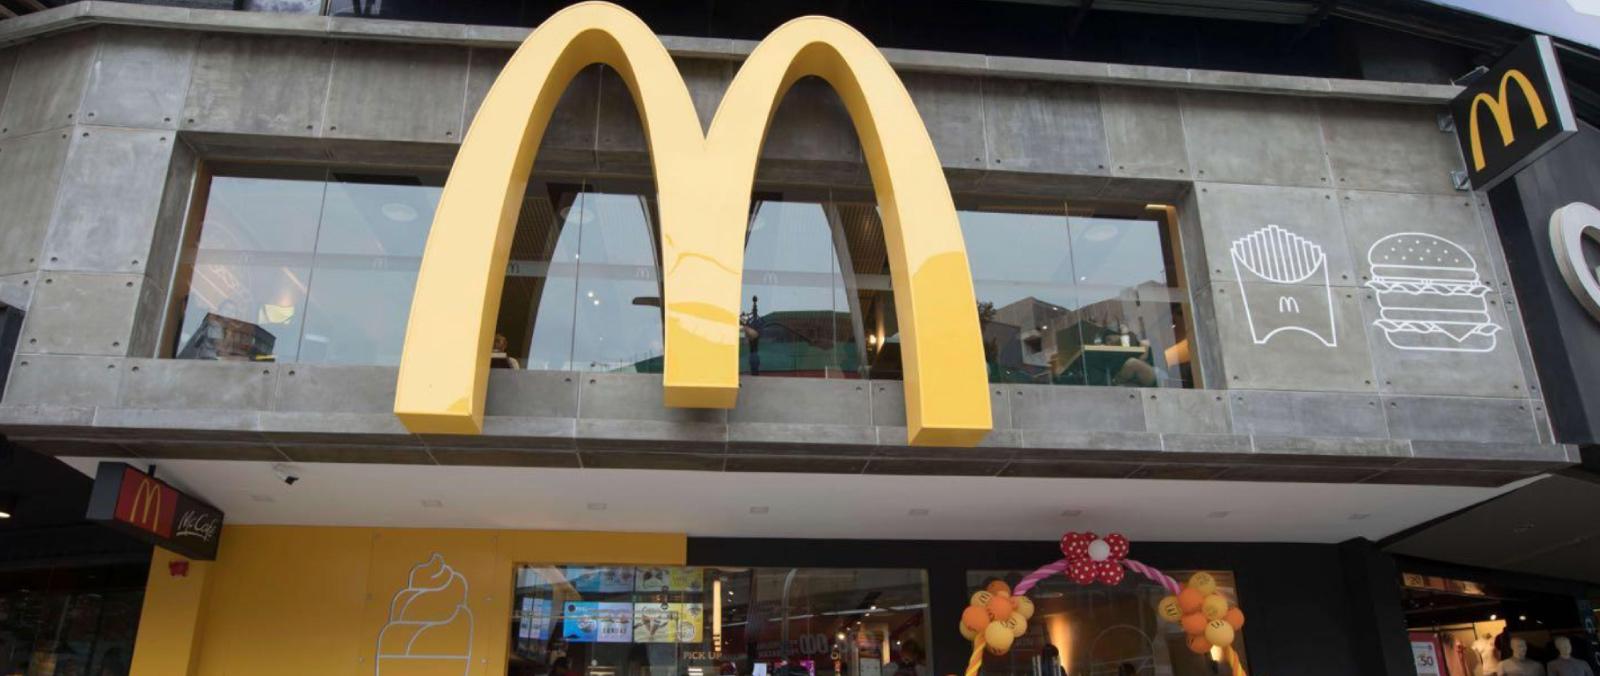 The Iconic McDonald's Bukit Bintang Now Has A New Look!'s image'